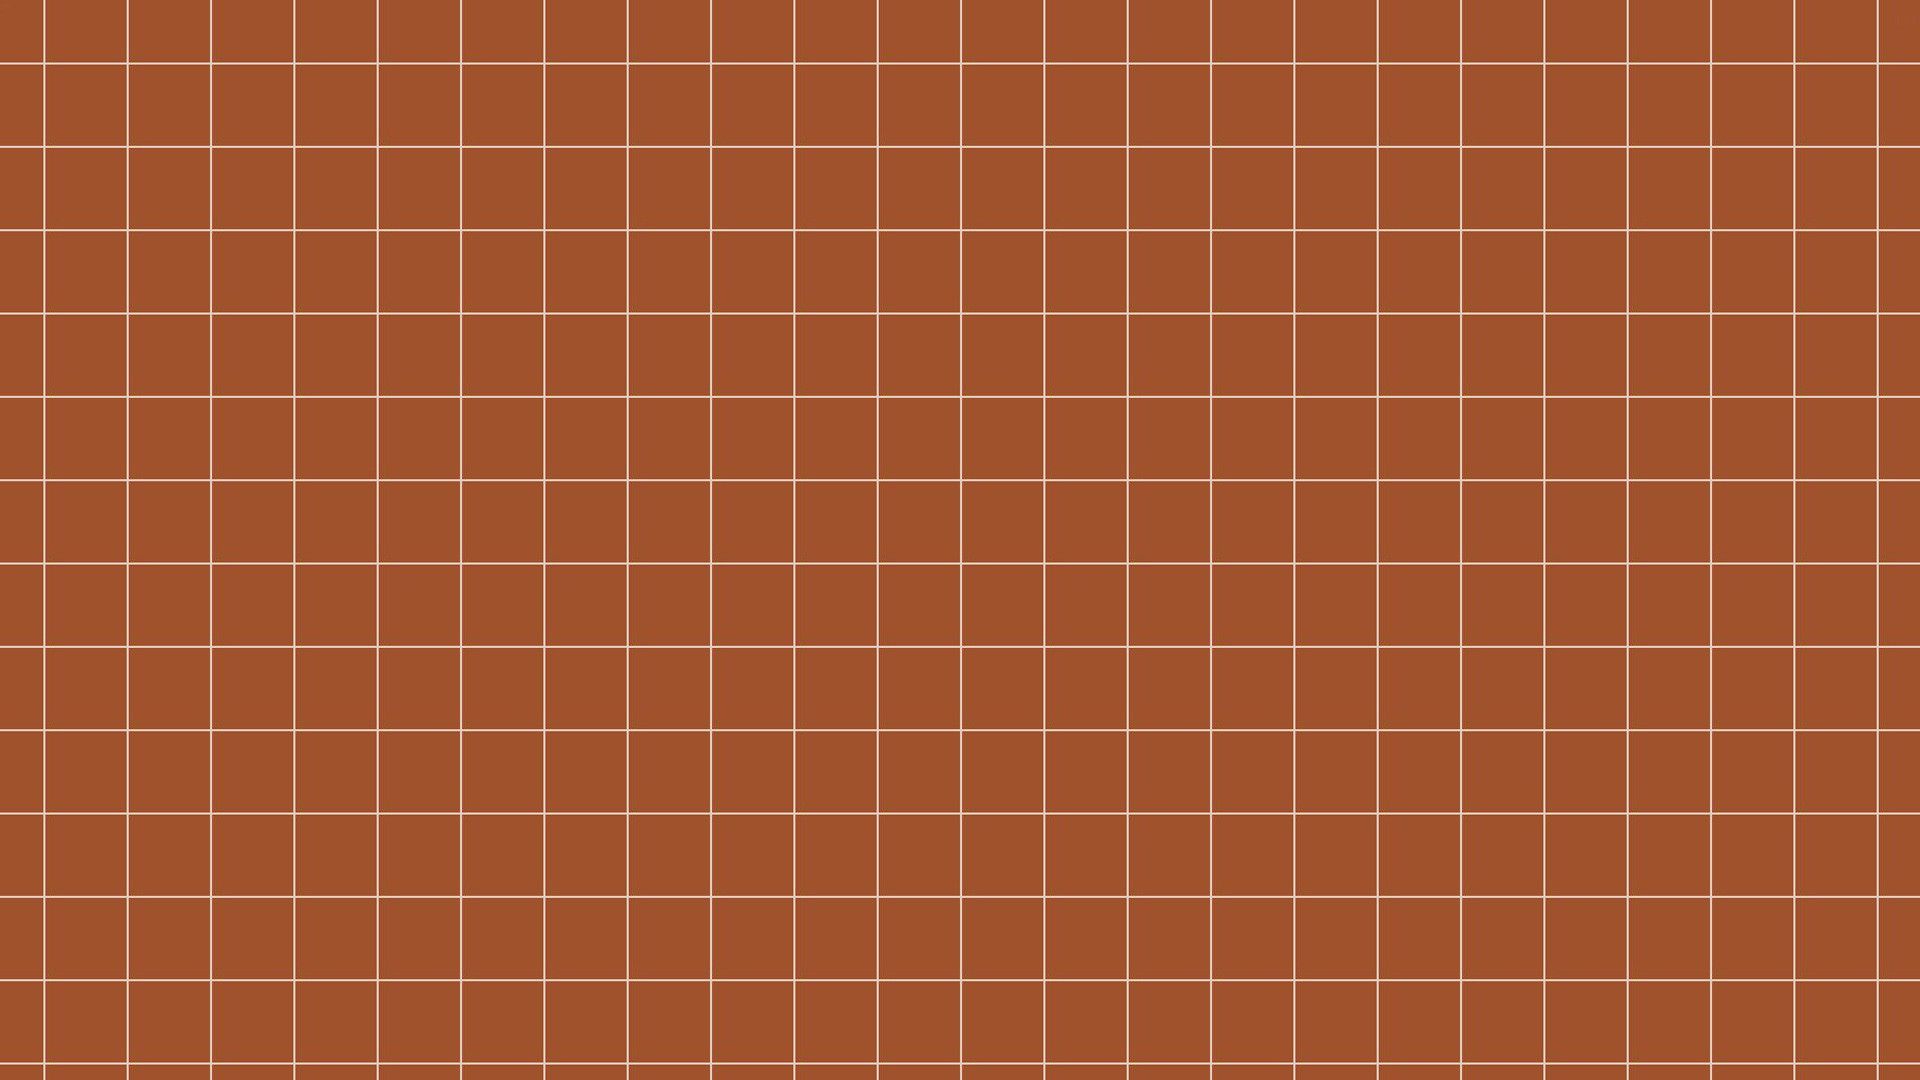 A brown tile pattern with white lines - Light brown, brown